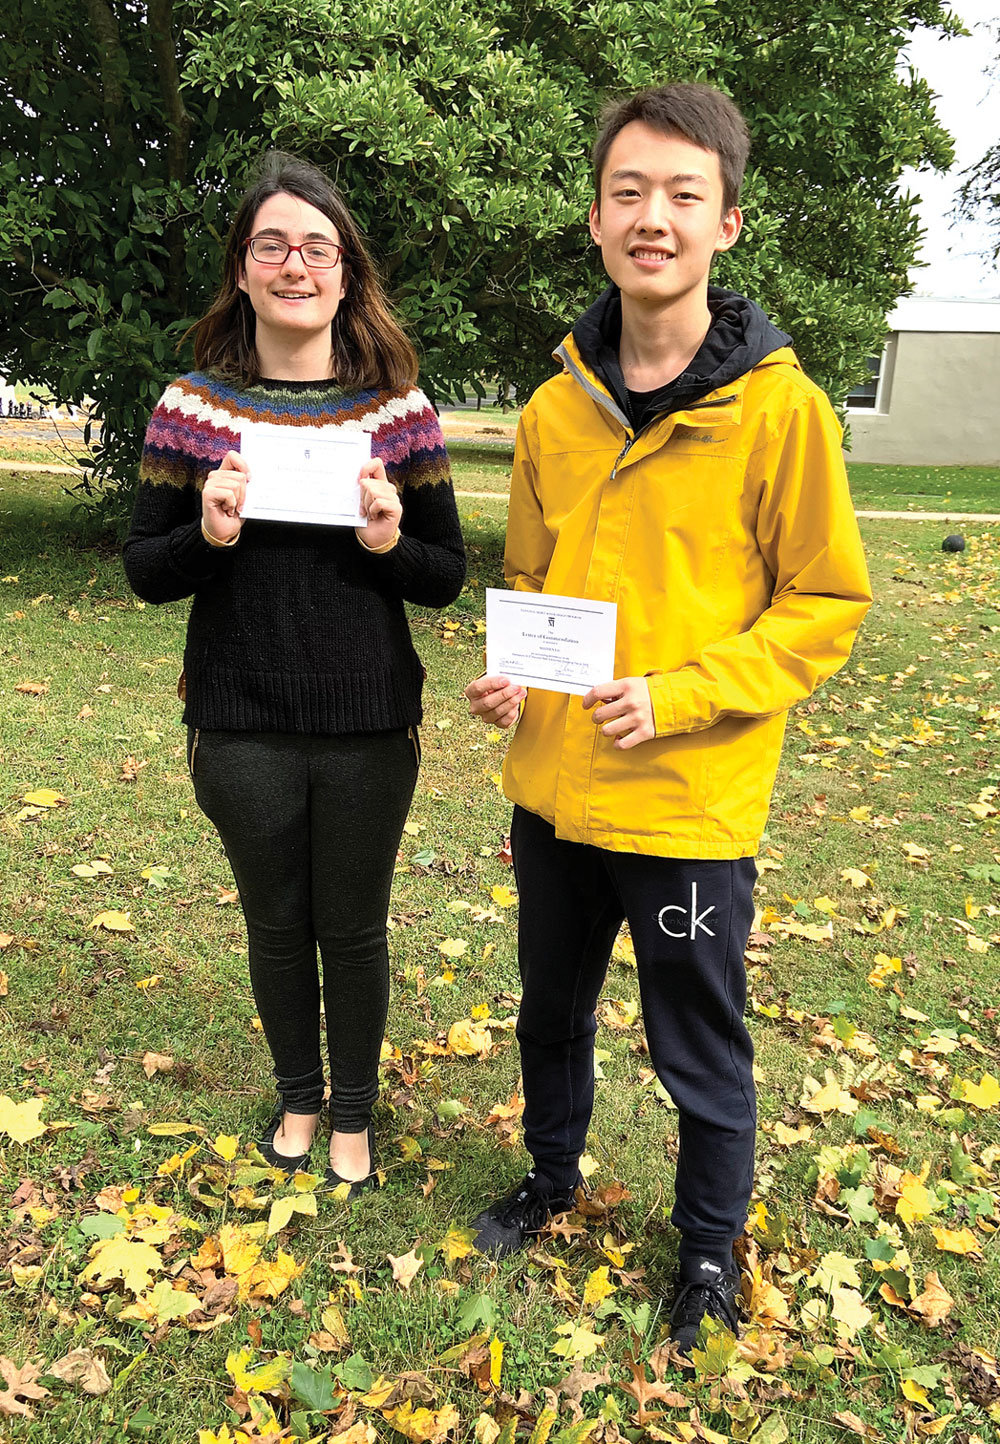 Solebury School students Rebecca Bozzo and Shizhen Liu have been named Commended Students in the 2020 National Merit Scholarship Program.